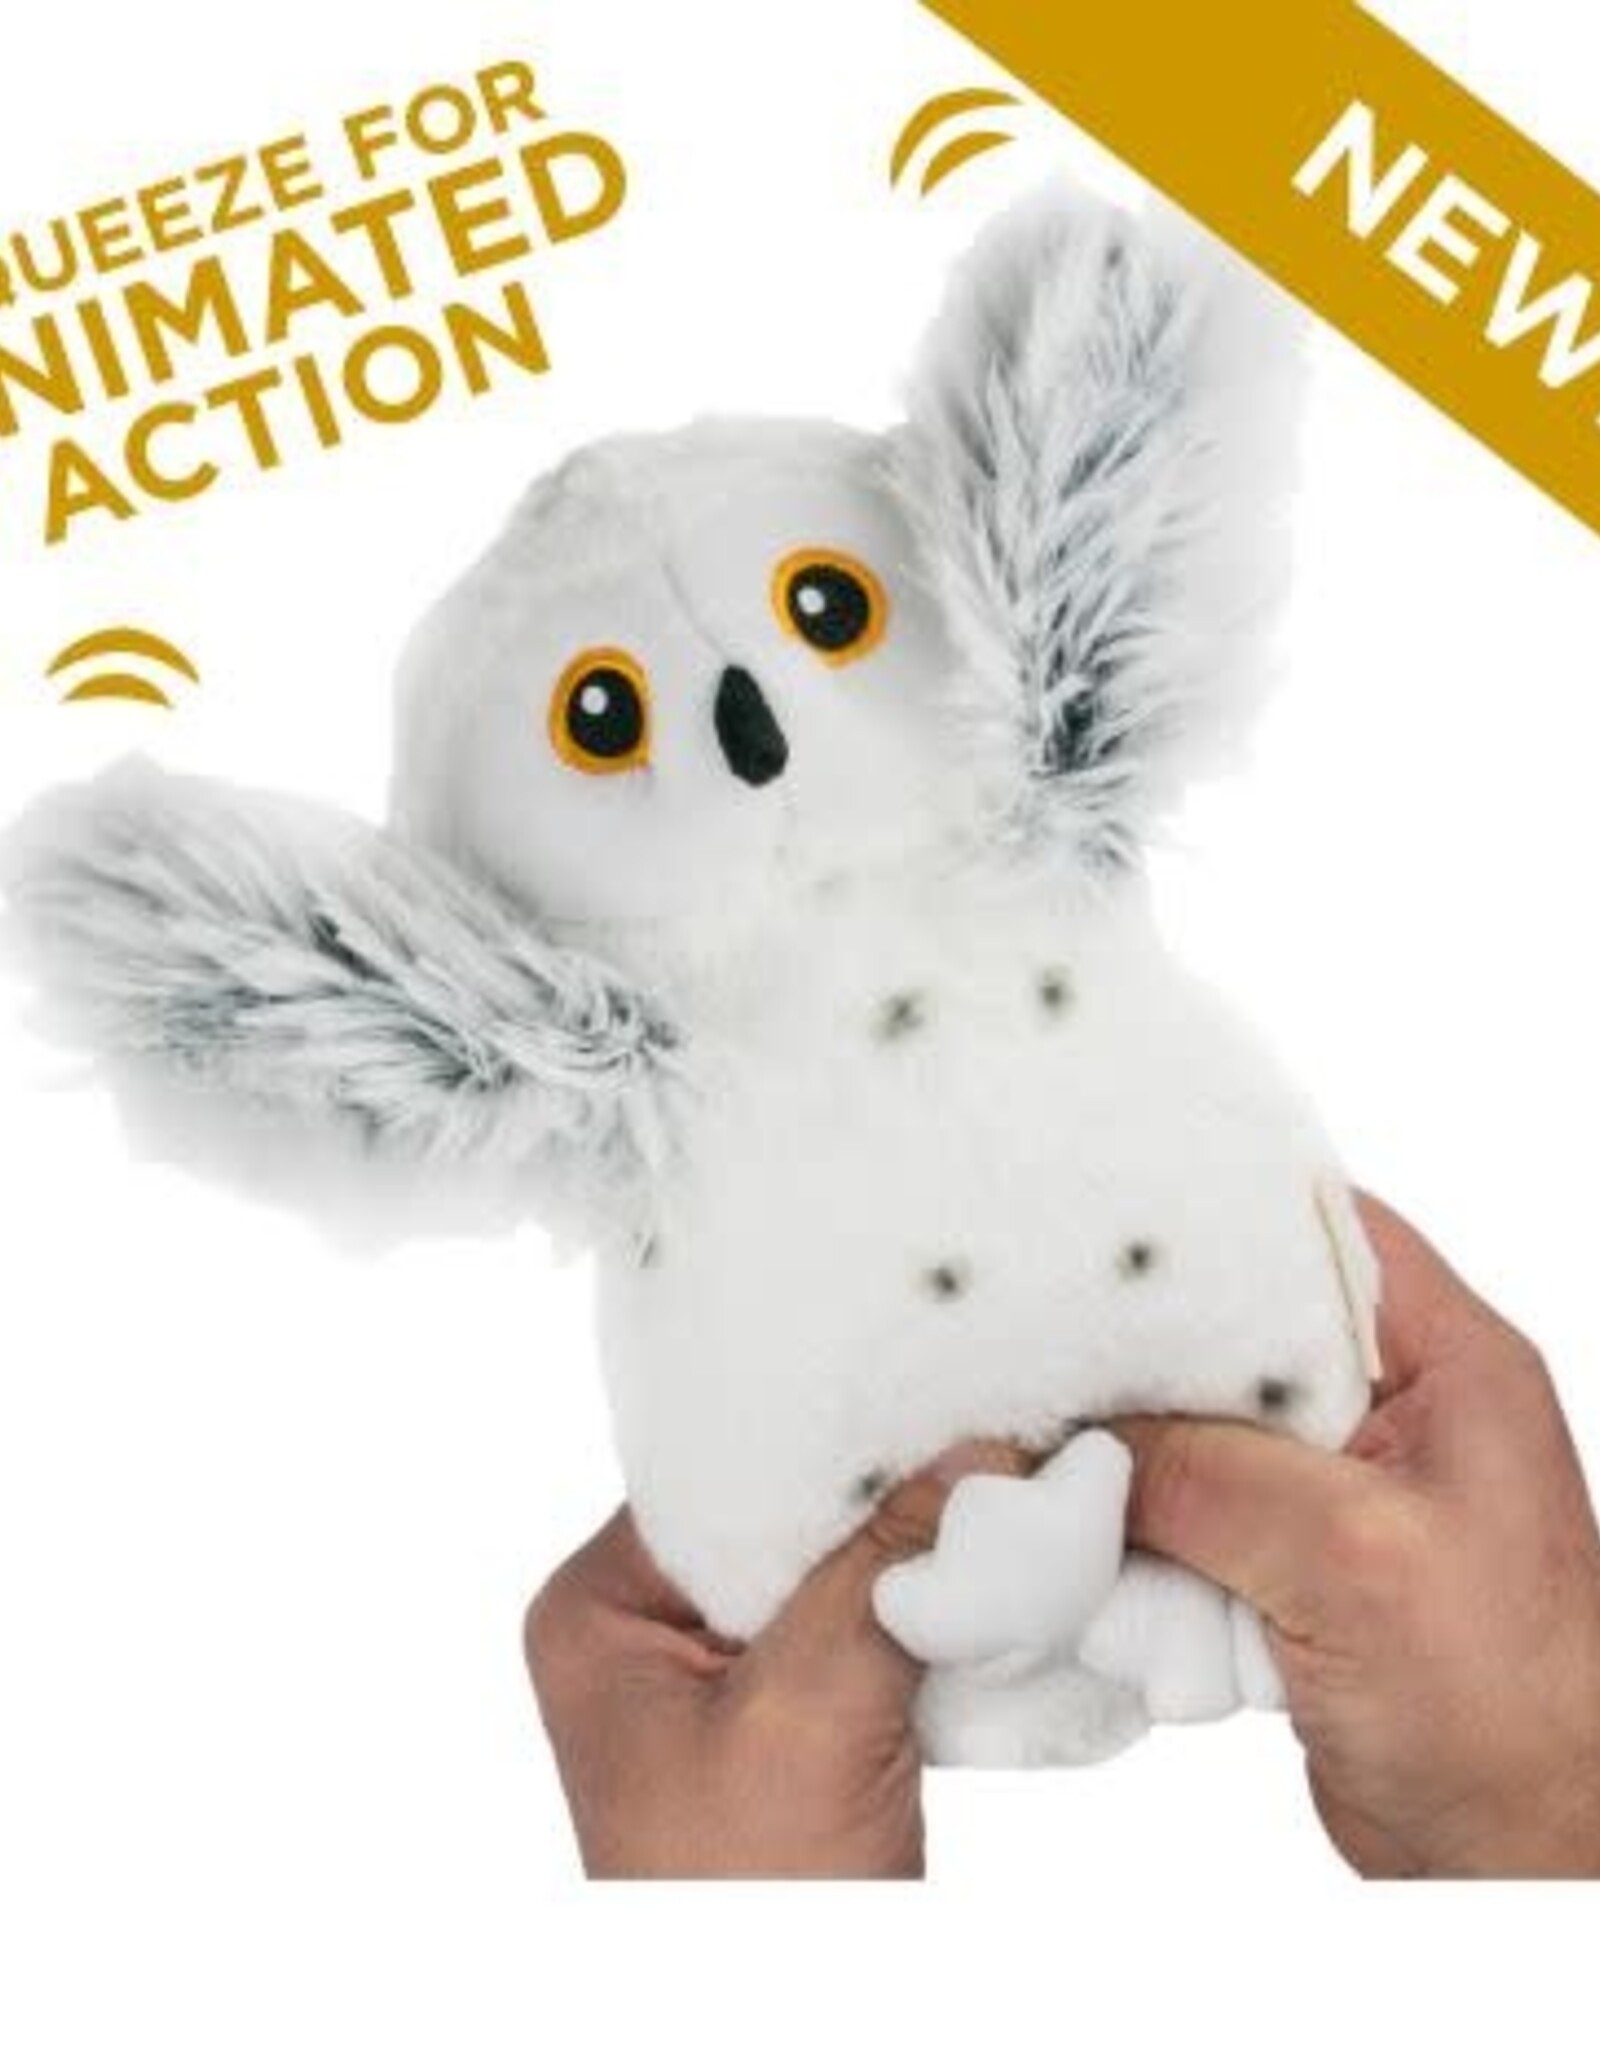 Tall Tails Tall Tails Animated Snow Owl 9.5"